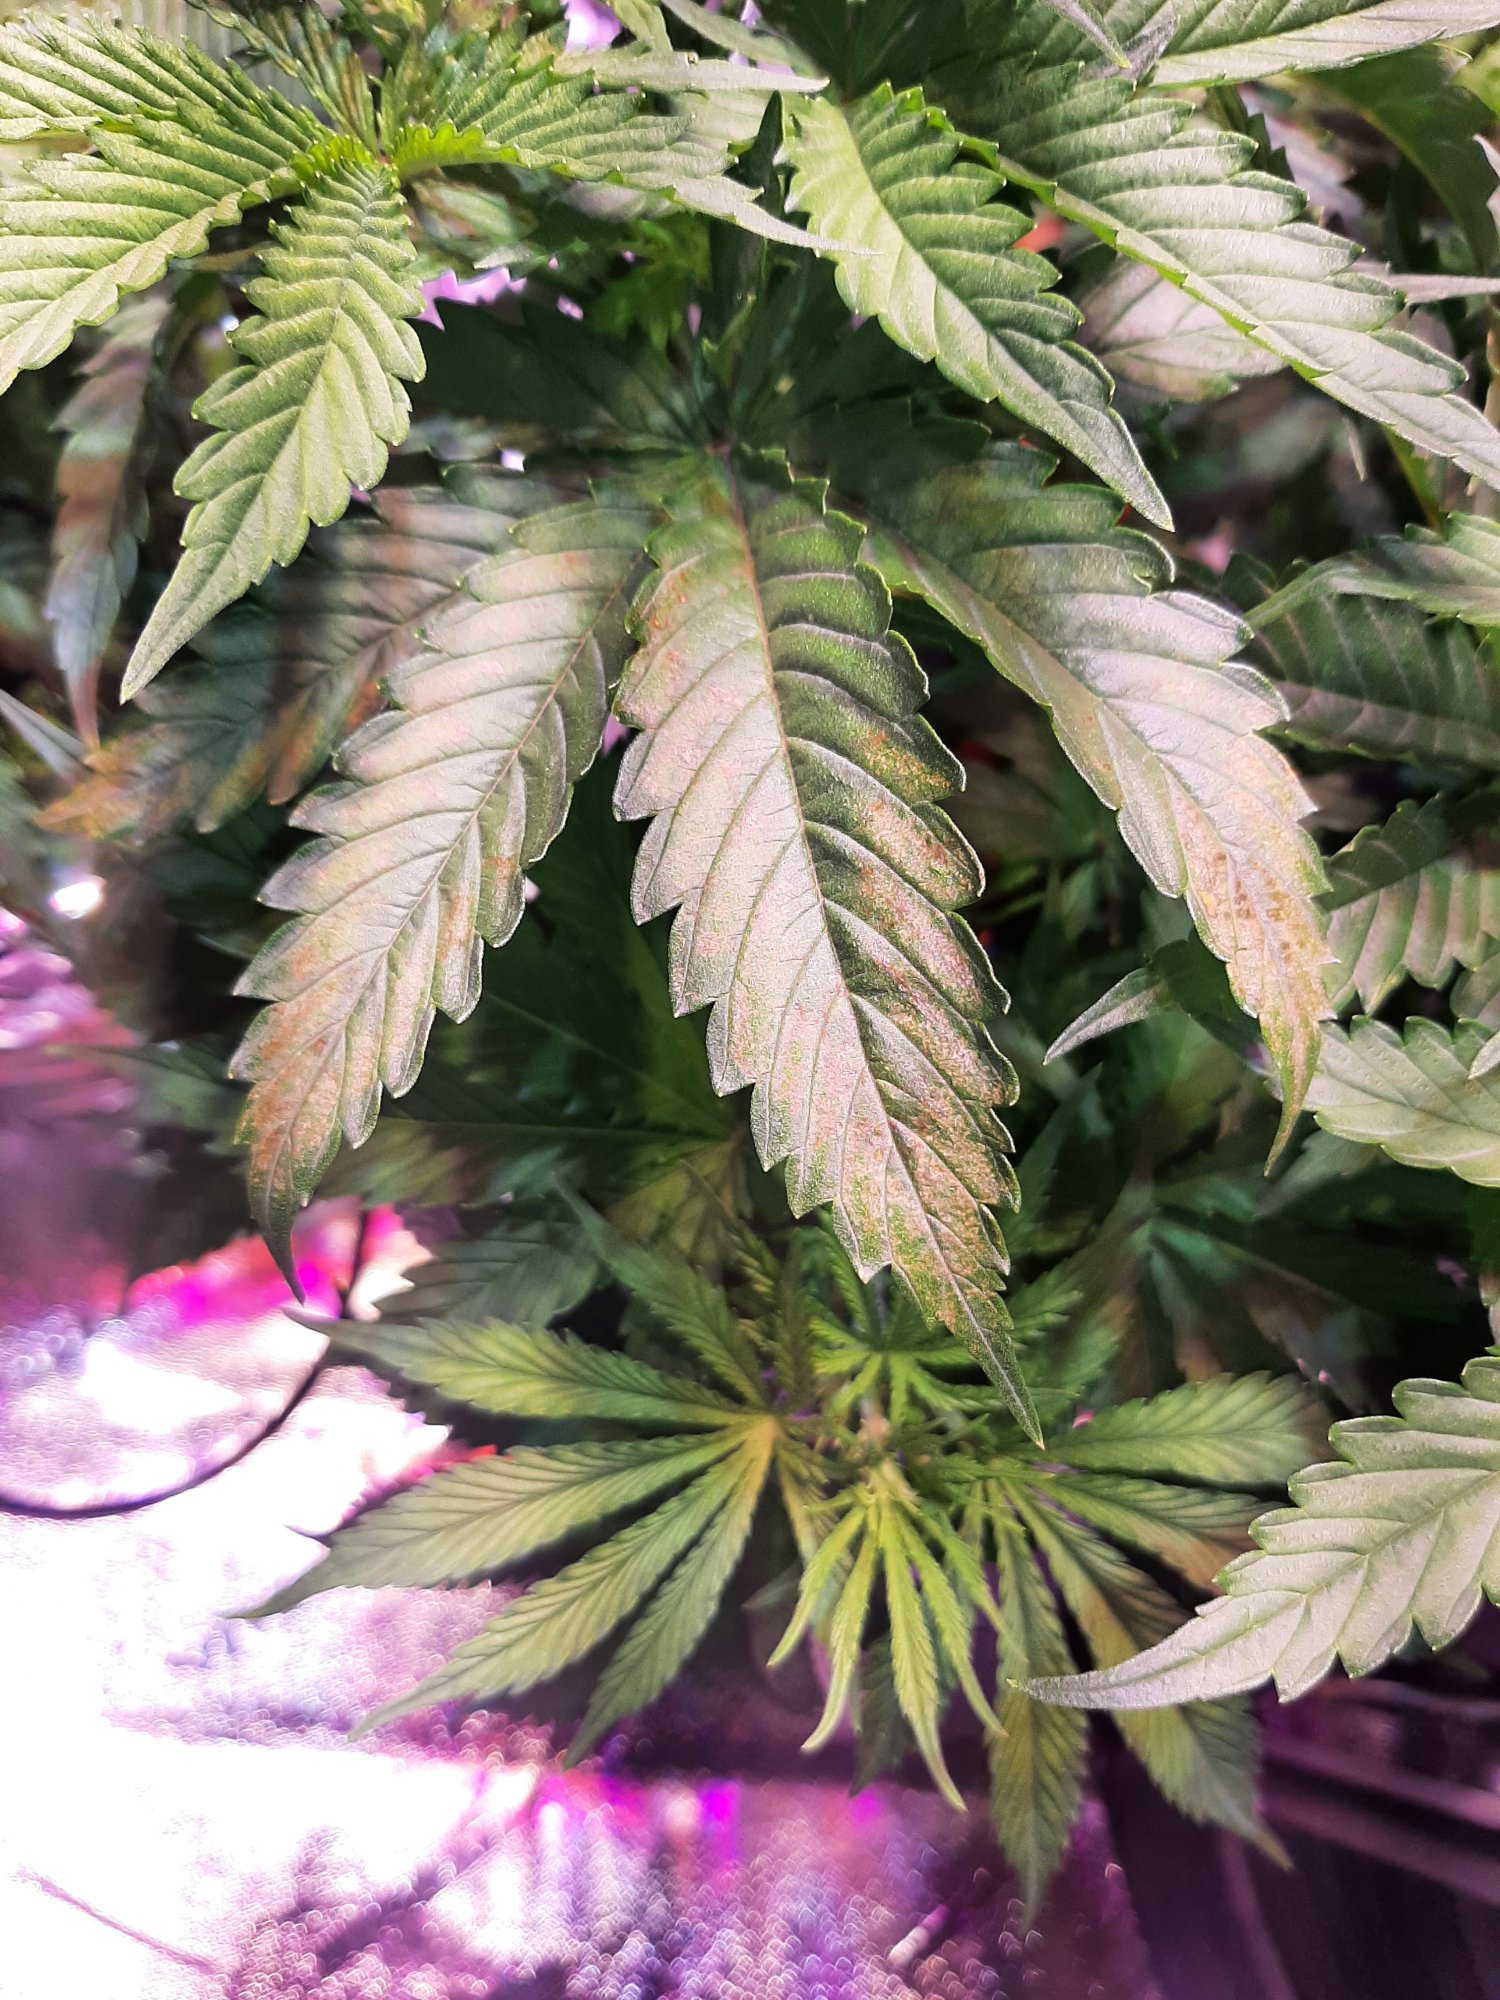 Help with identifying spots on leaves